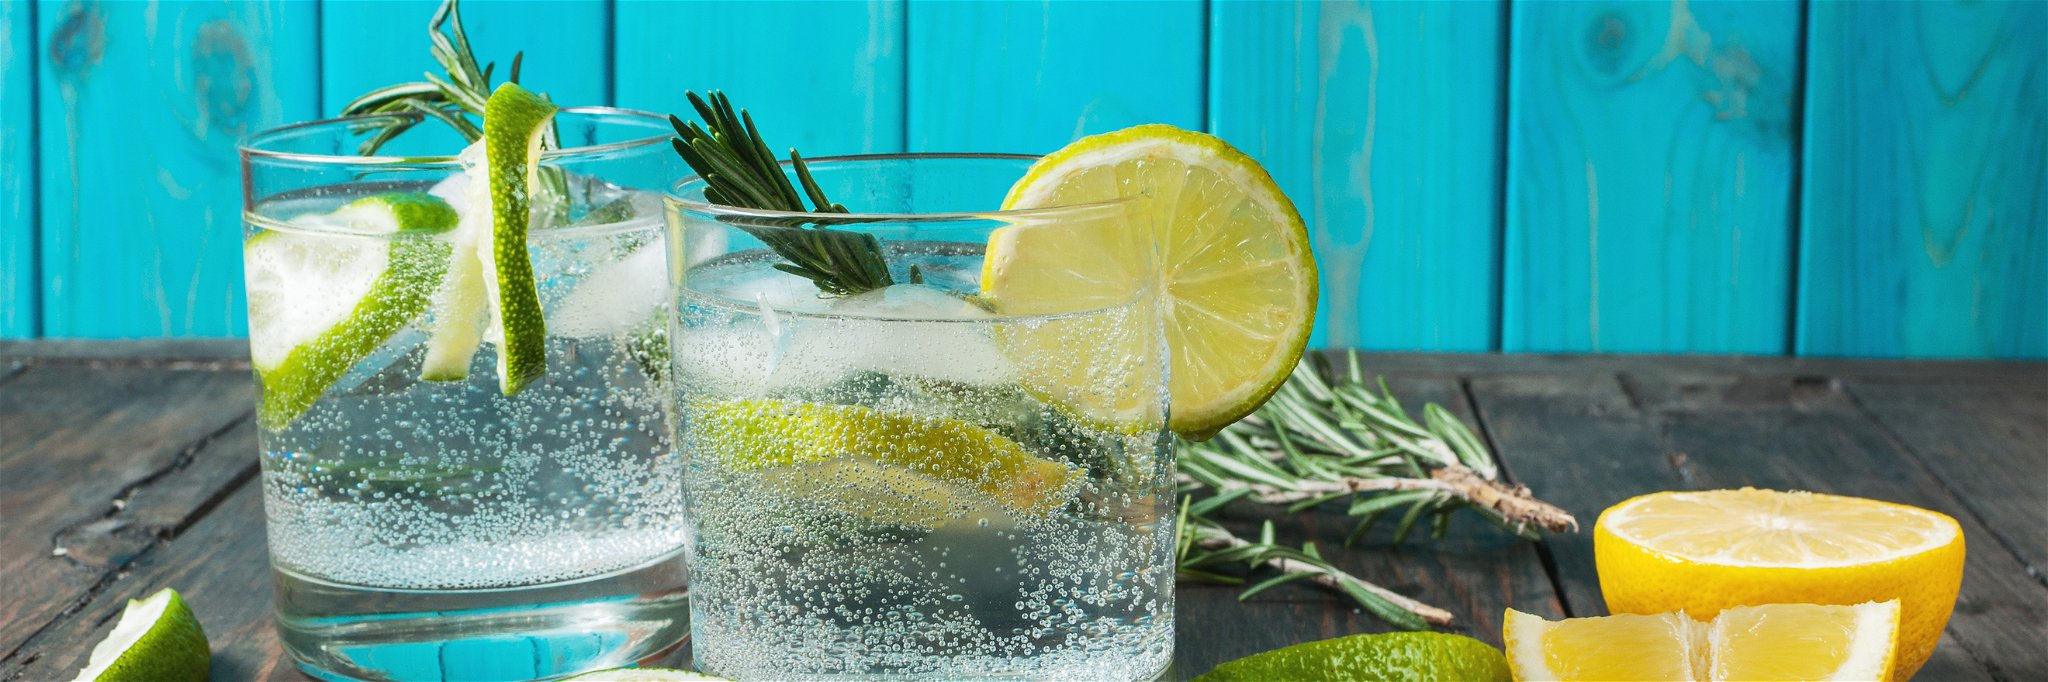 Gin and tonic...a perfect pairing.